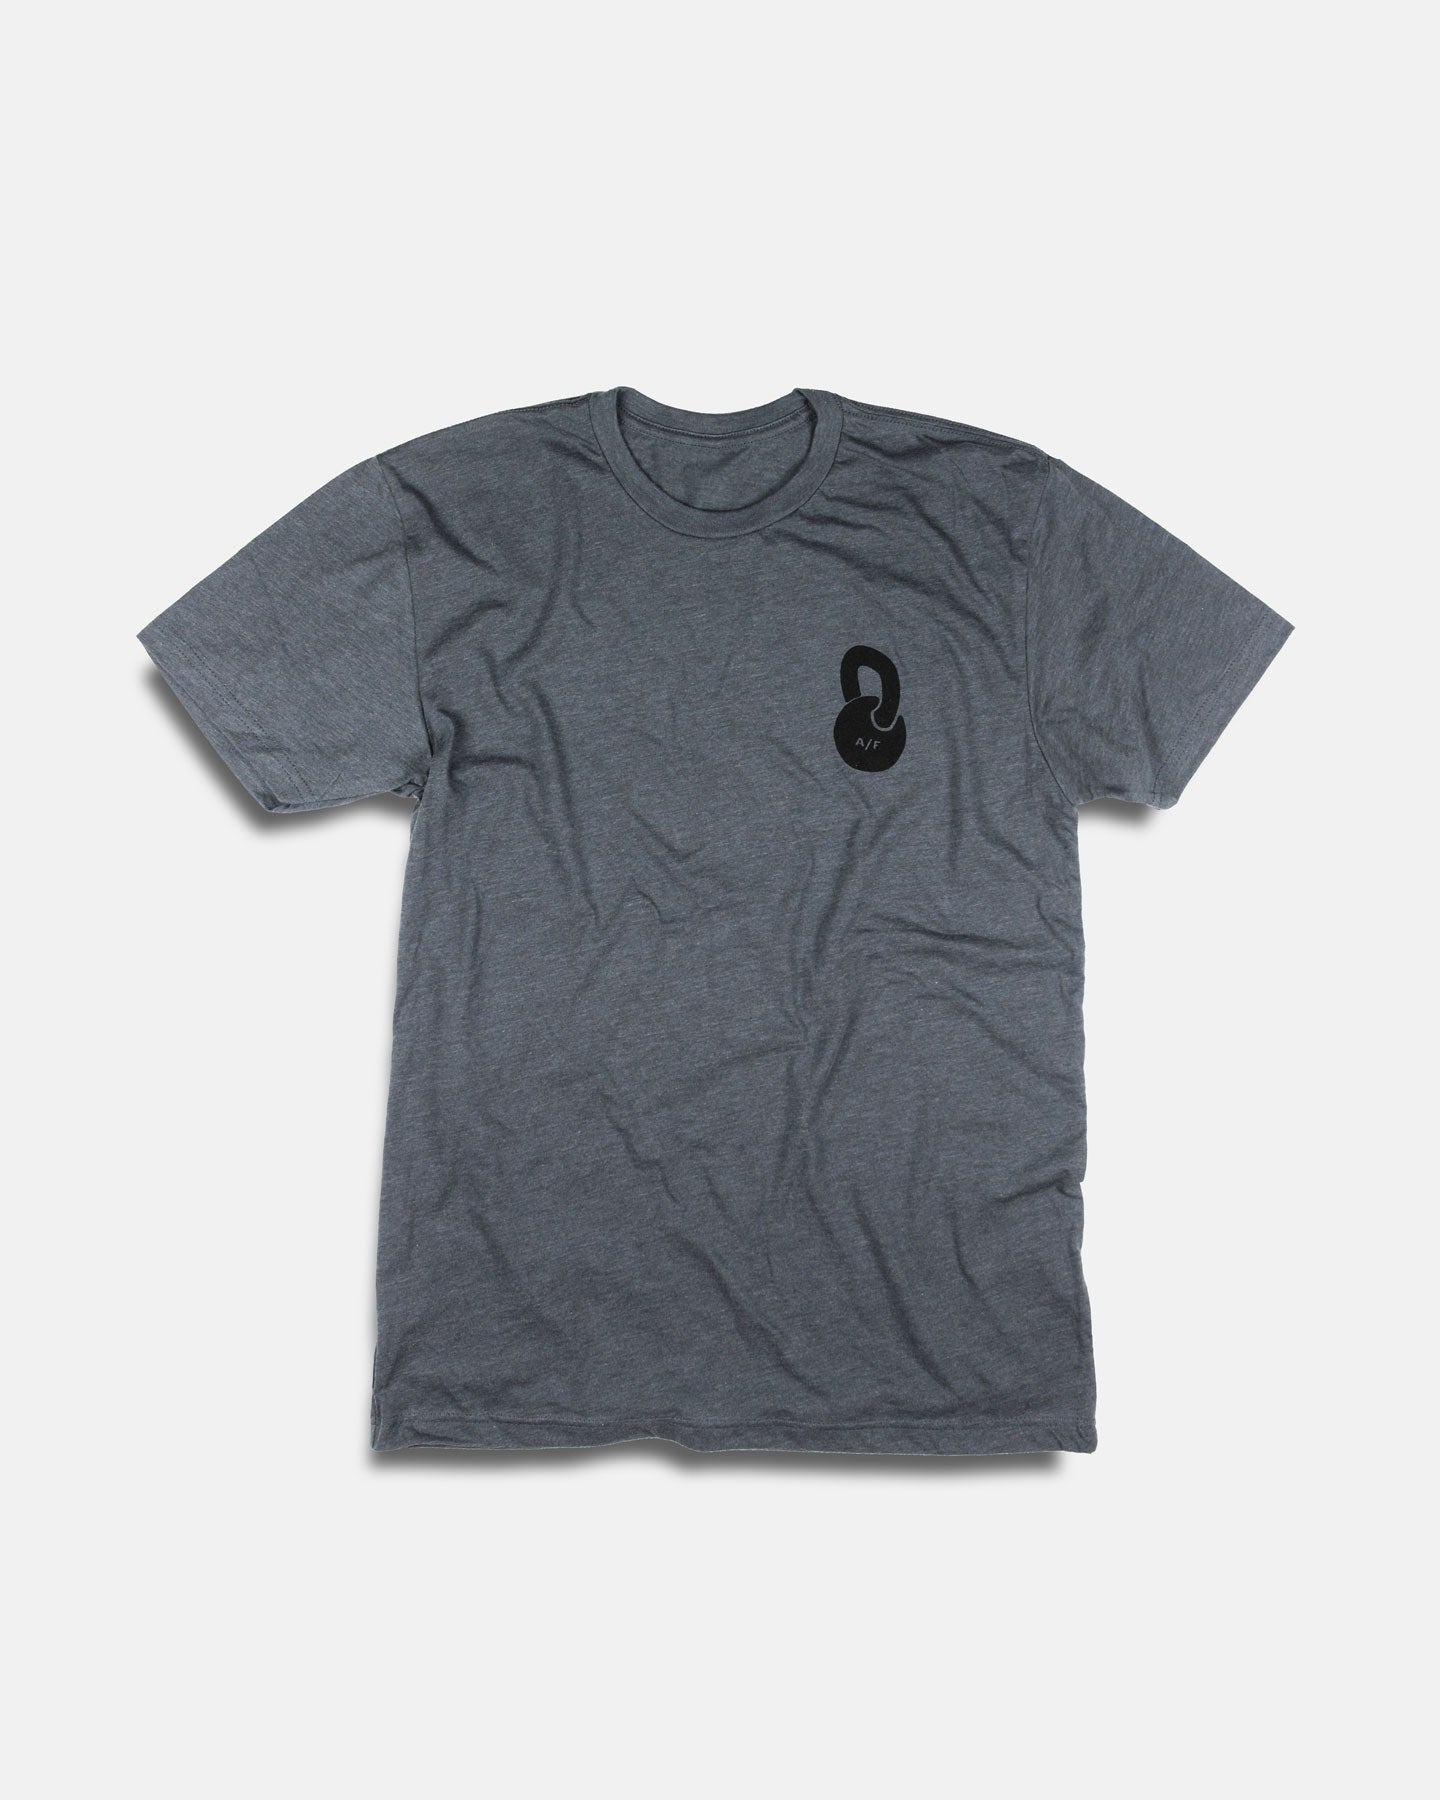 Pursuit Tee - Support the Daily Grind